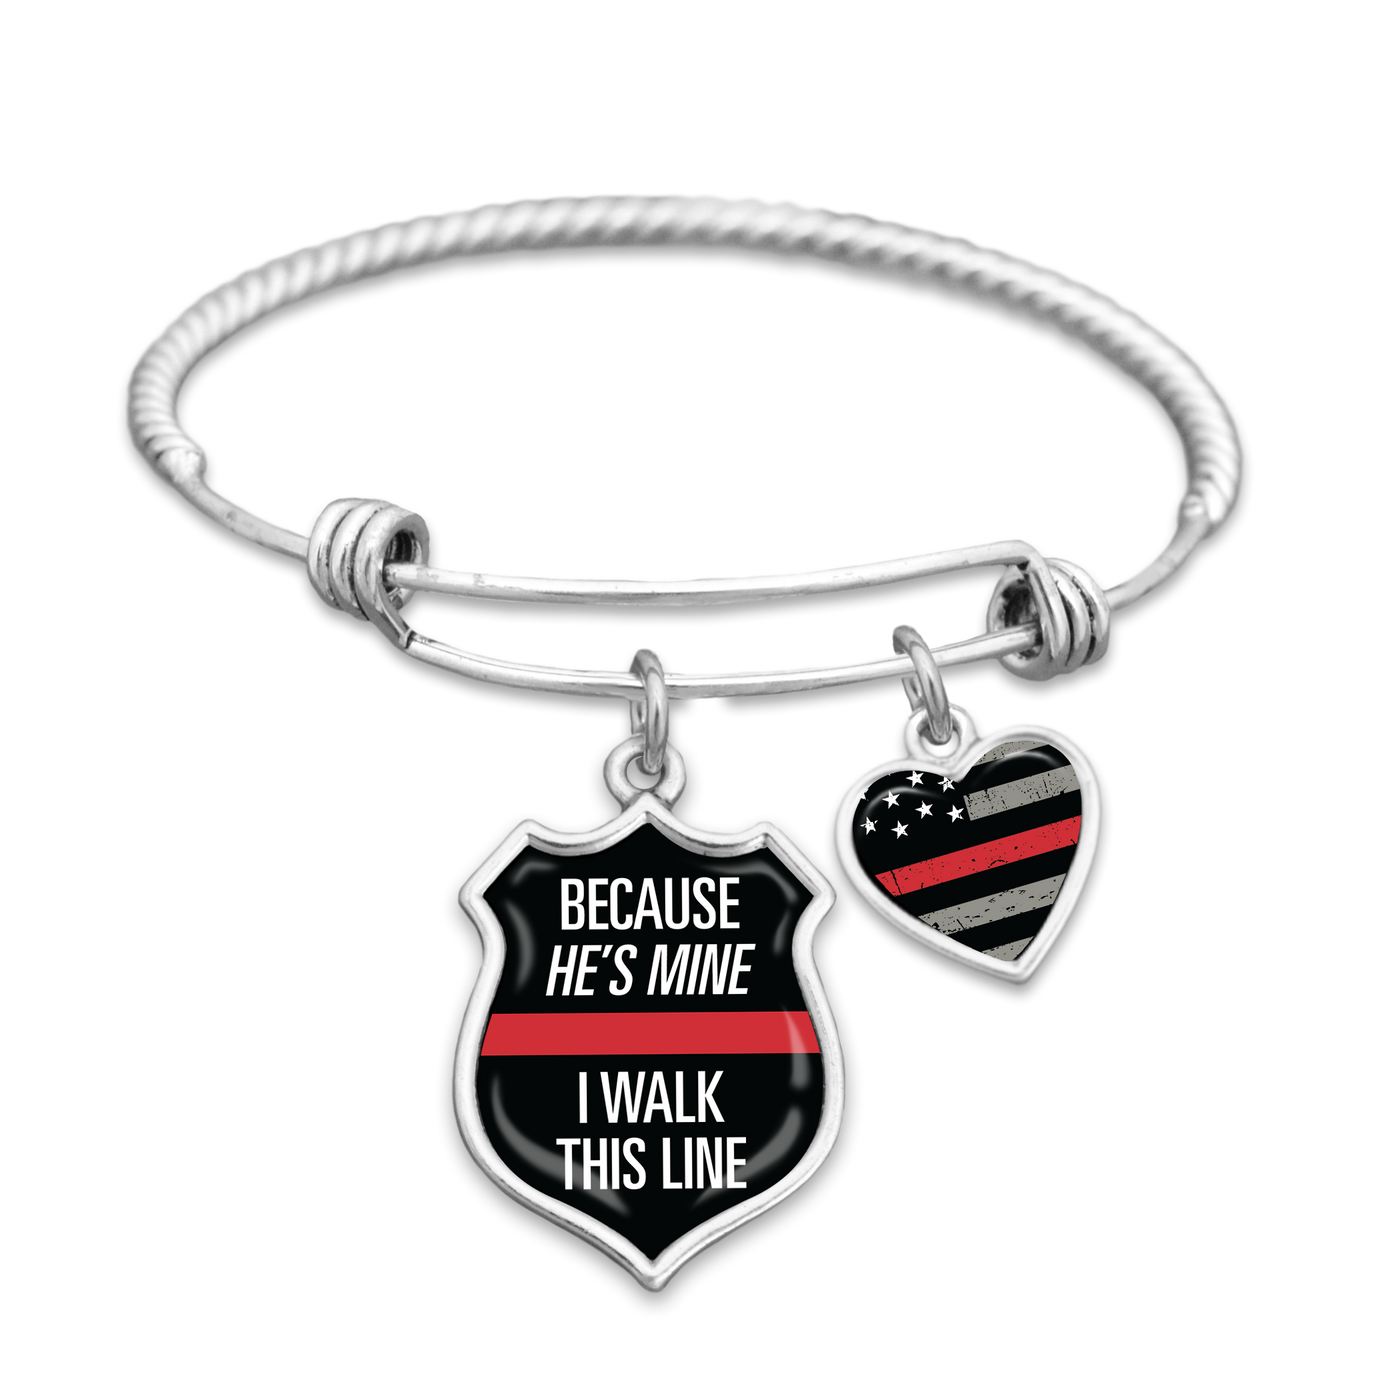 Because He's Mine I Walk This Line Firefighter Charm Bracelet